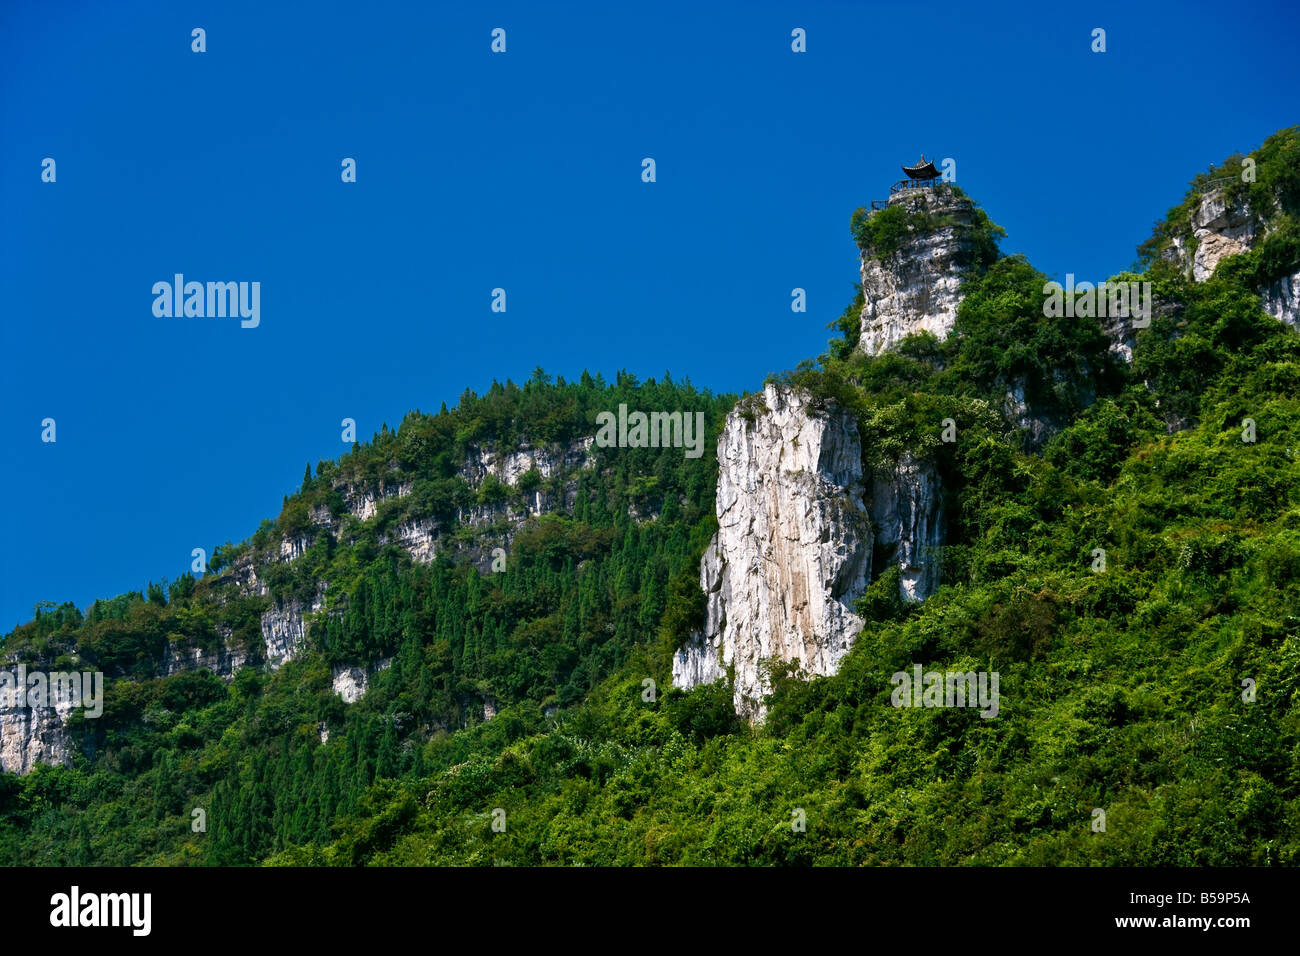 Observation point Xiling Gorge Yangzi River between Sandouping and Yichang downstream from Three Gorges Dam China JMH3453 Stock Photo